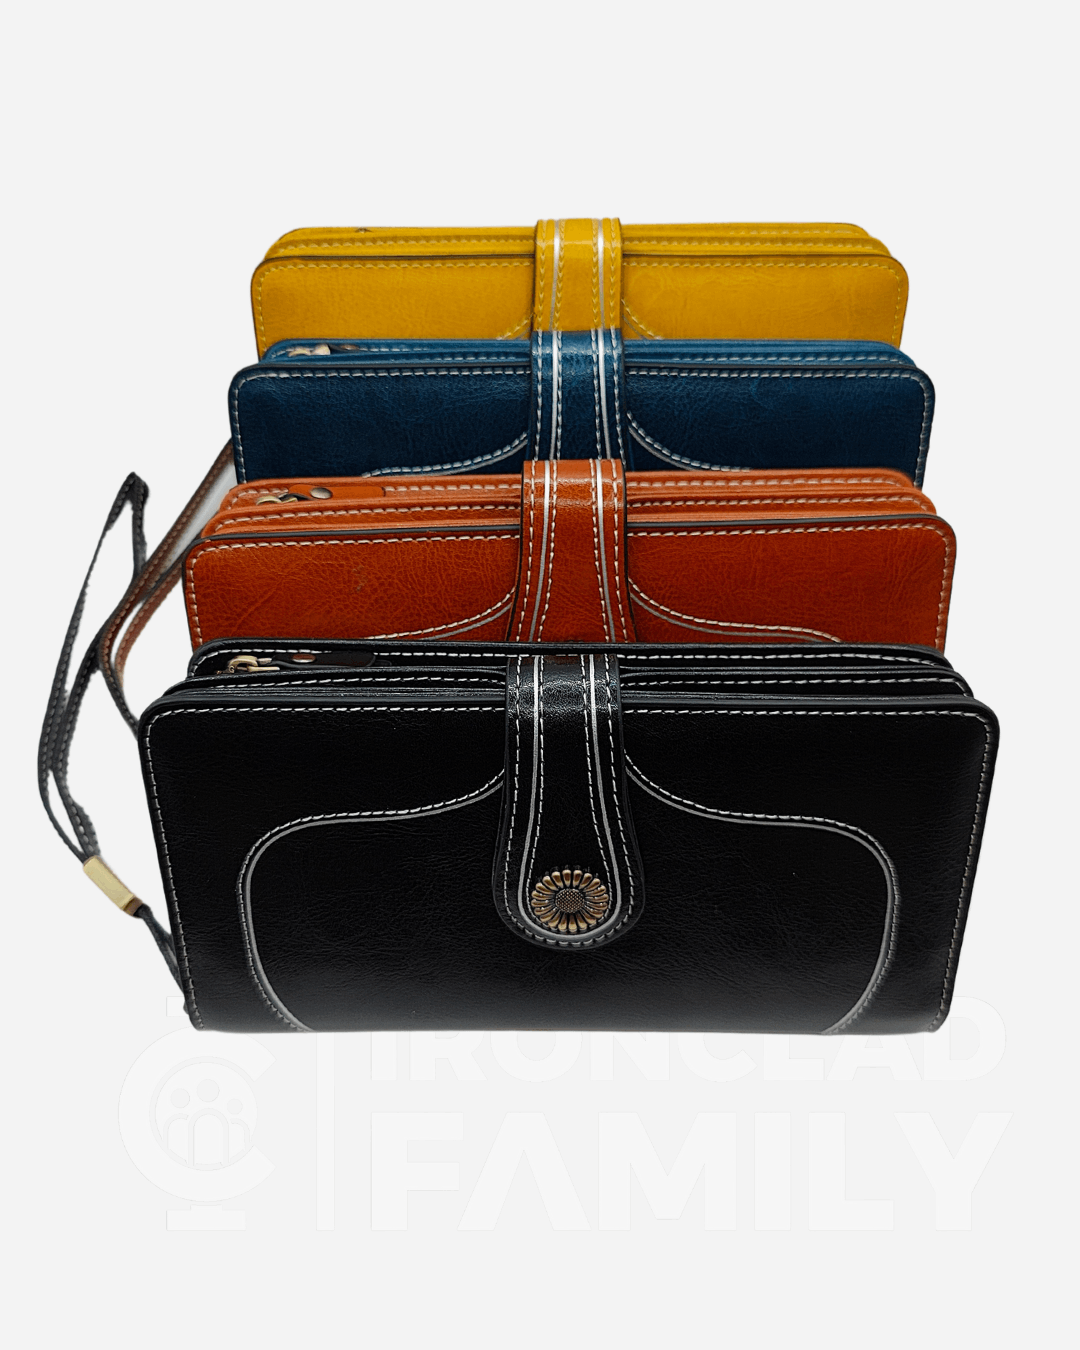 Three RFID Blocking Large Capacity Leather Wallets in different colors displayed together